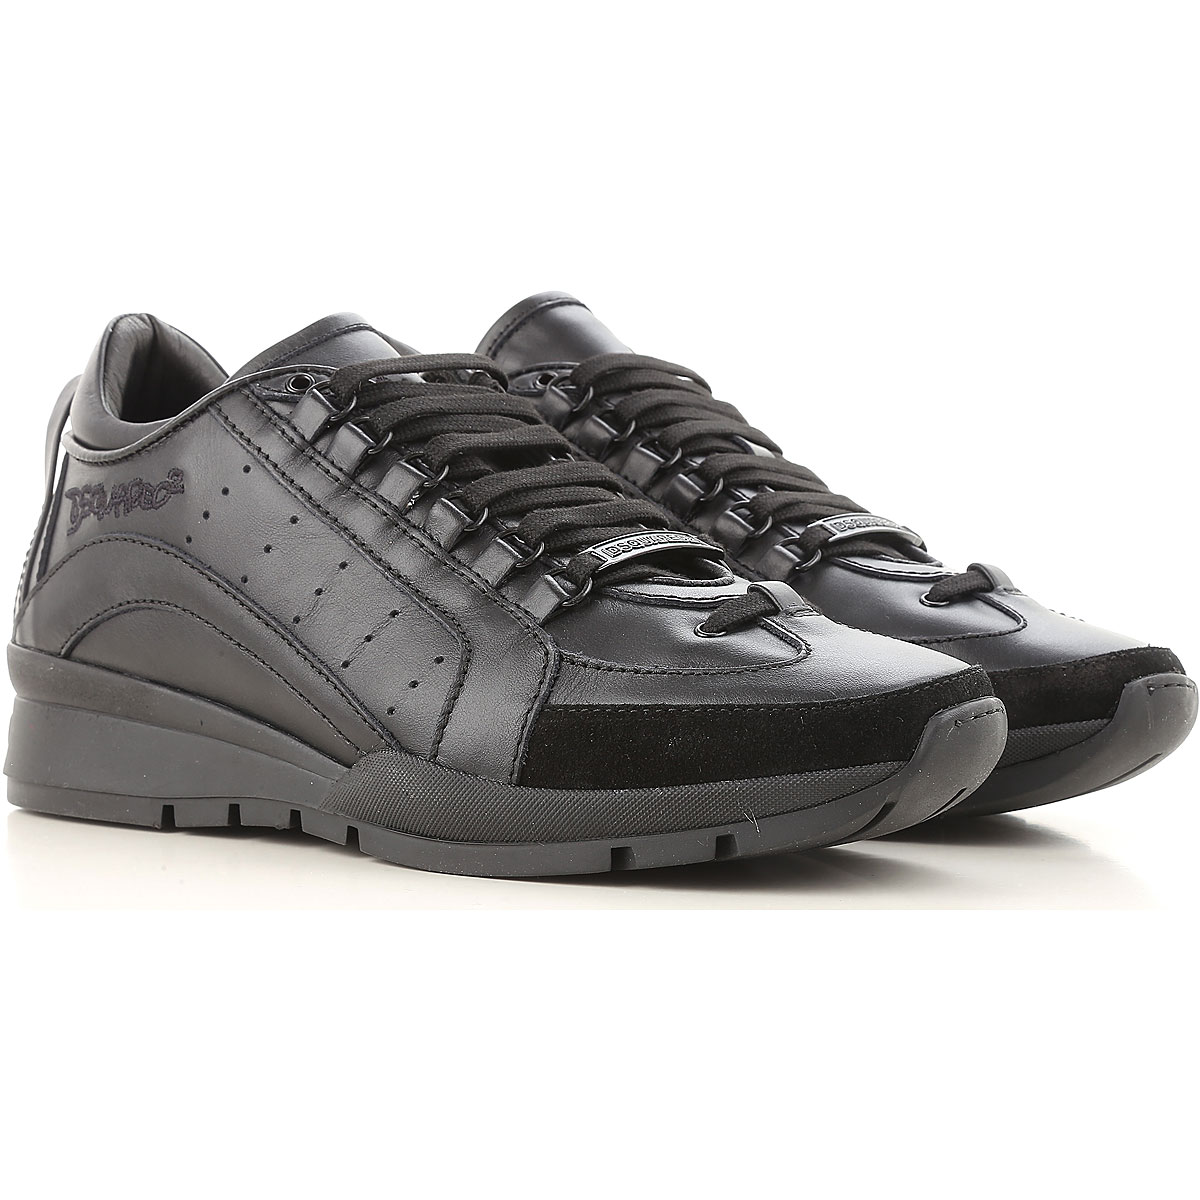 Mens Shoes Dsquared2, Style code 